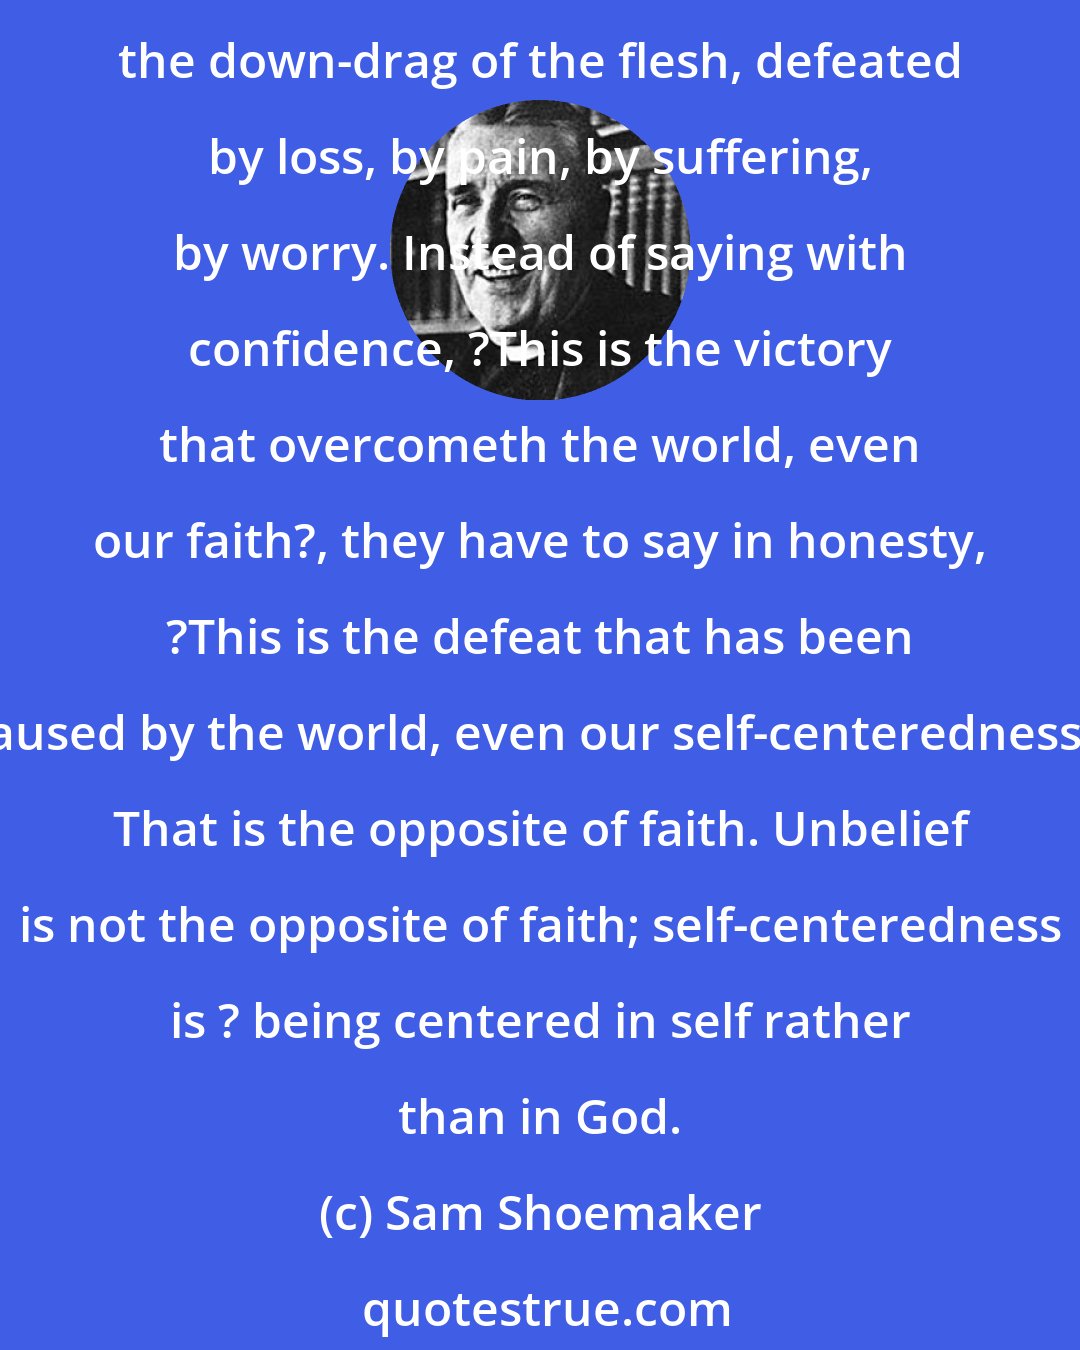 Sam Shoemaker: Let us face at the outset how many Christians are not victorious, but defeated. Defeated by circumstances, defeated by other peoples? natures and wrong-doings, defeated by the down-drag of the flesh, defeated by loss, by pain, by suffering, by worry. Instead of saying with confidence, ?This is the victory that overcometh the world, even our faith?, they have to say in honesty, ?This is the defeat that has been caused by the world, even our self-centeredness.? That is the opposite of faith. Unbelief is not the opposite of faith; self-centeredness is ? being centered in self rather than in God.